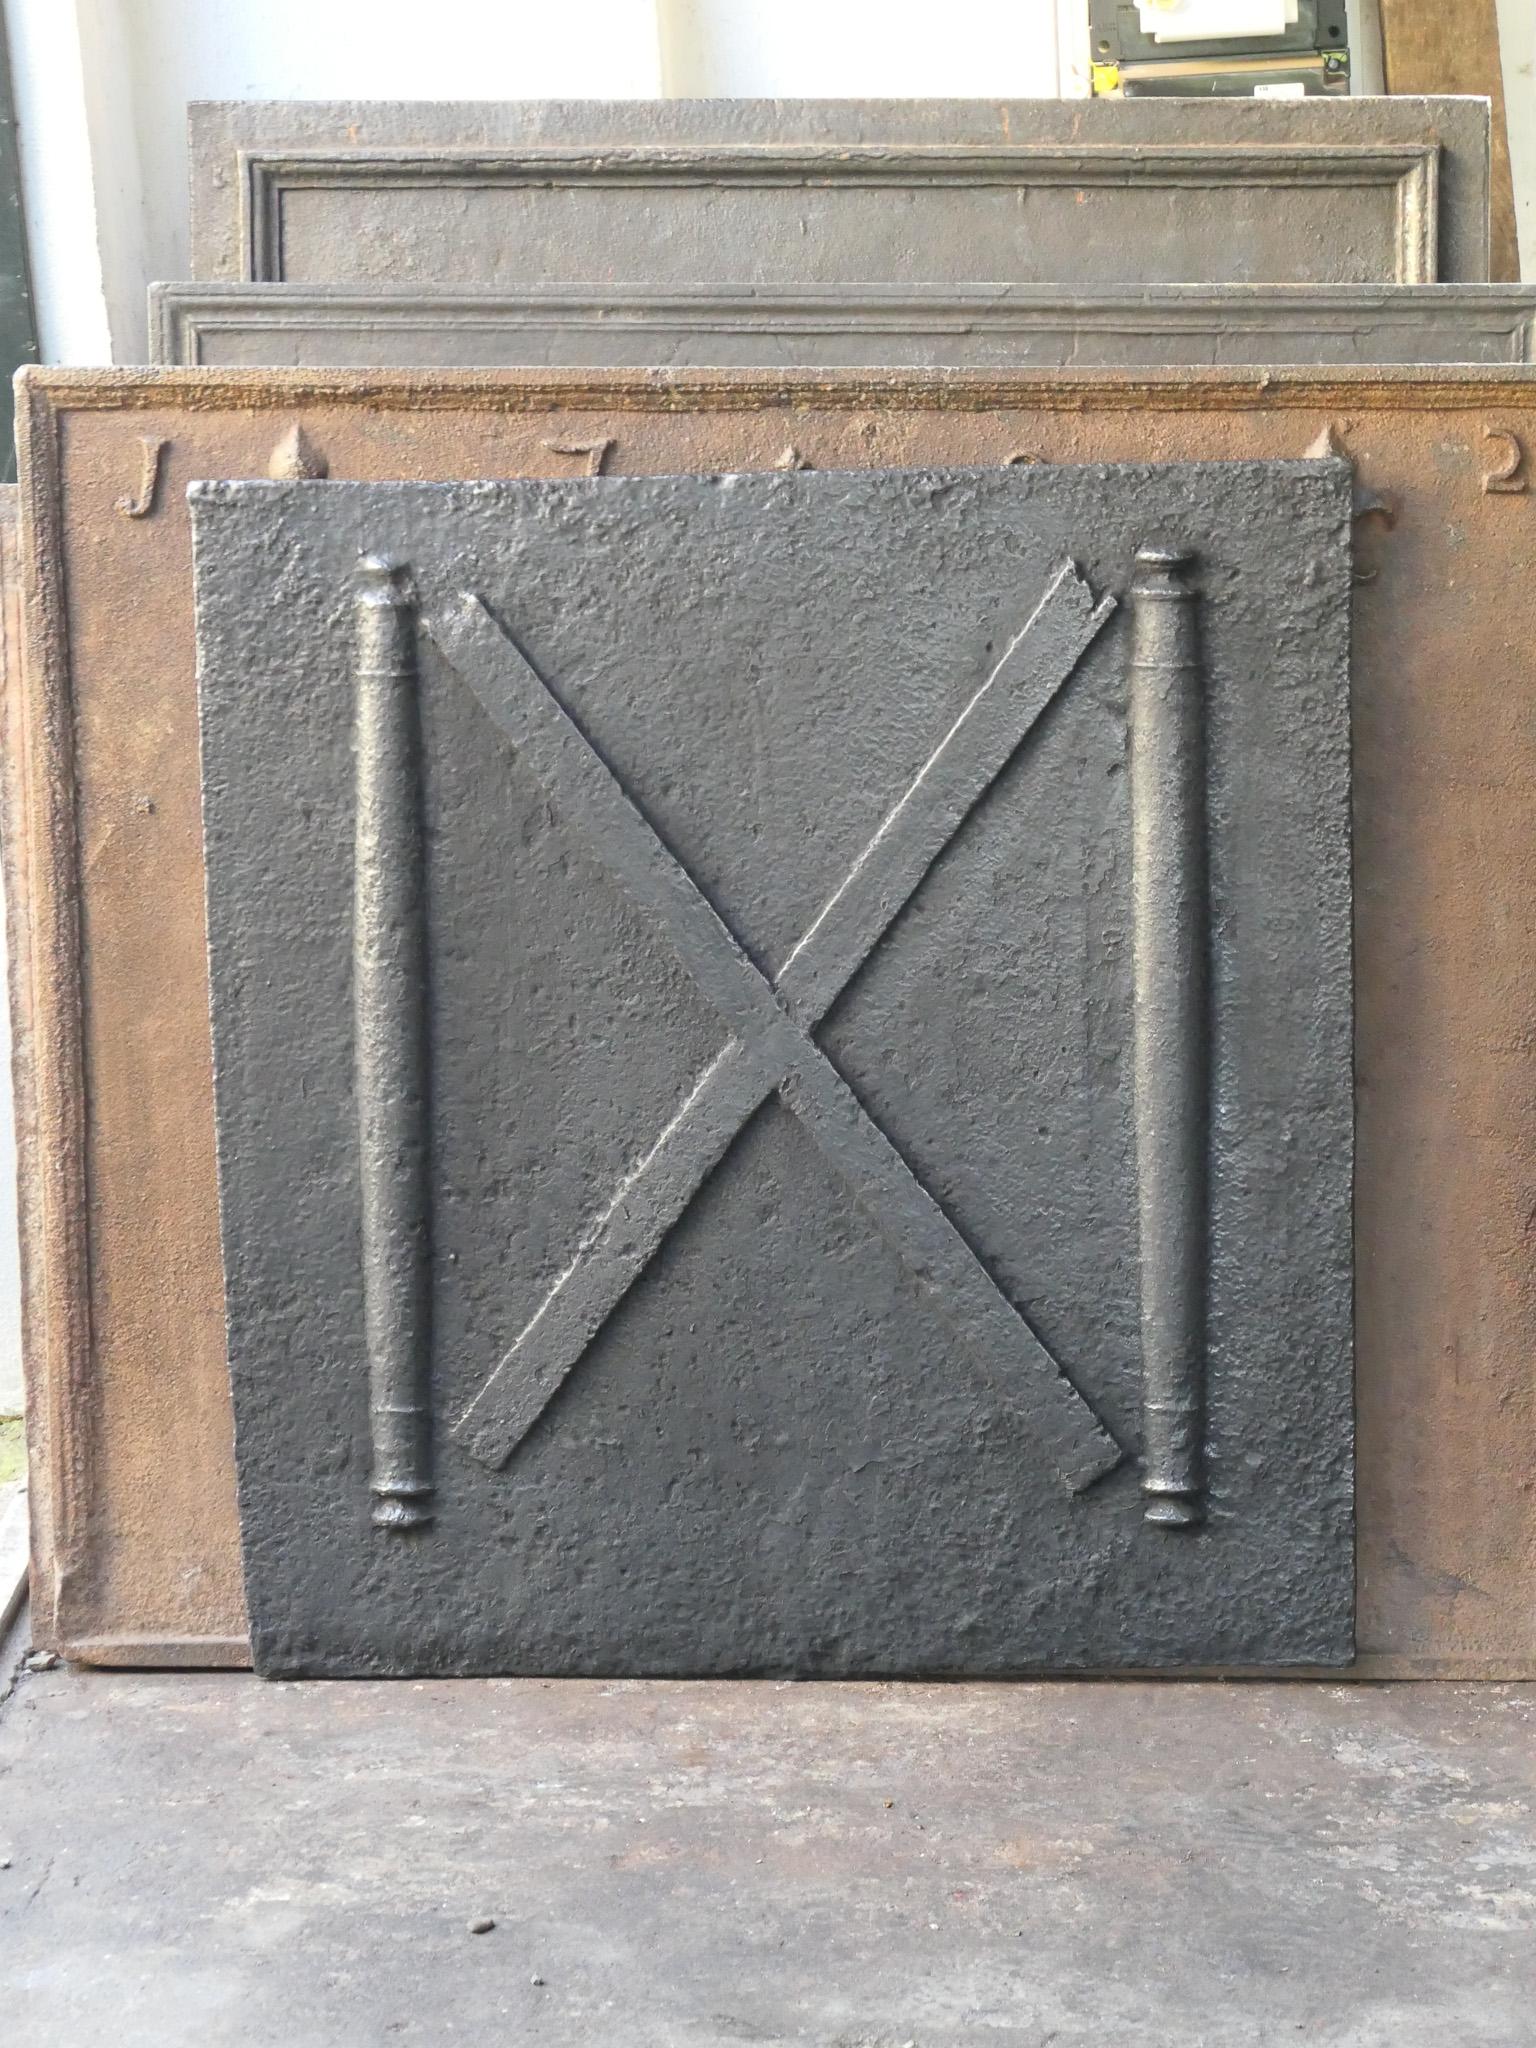 18th century Louis XIV period French fireback with a Saint Andrew's cross and two pillars of Hercules. Saint Andrew is said to have been martyred on a cross in this shape. As a result the cross became a sign for humility and sacrifice. The pillars